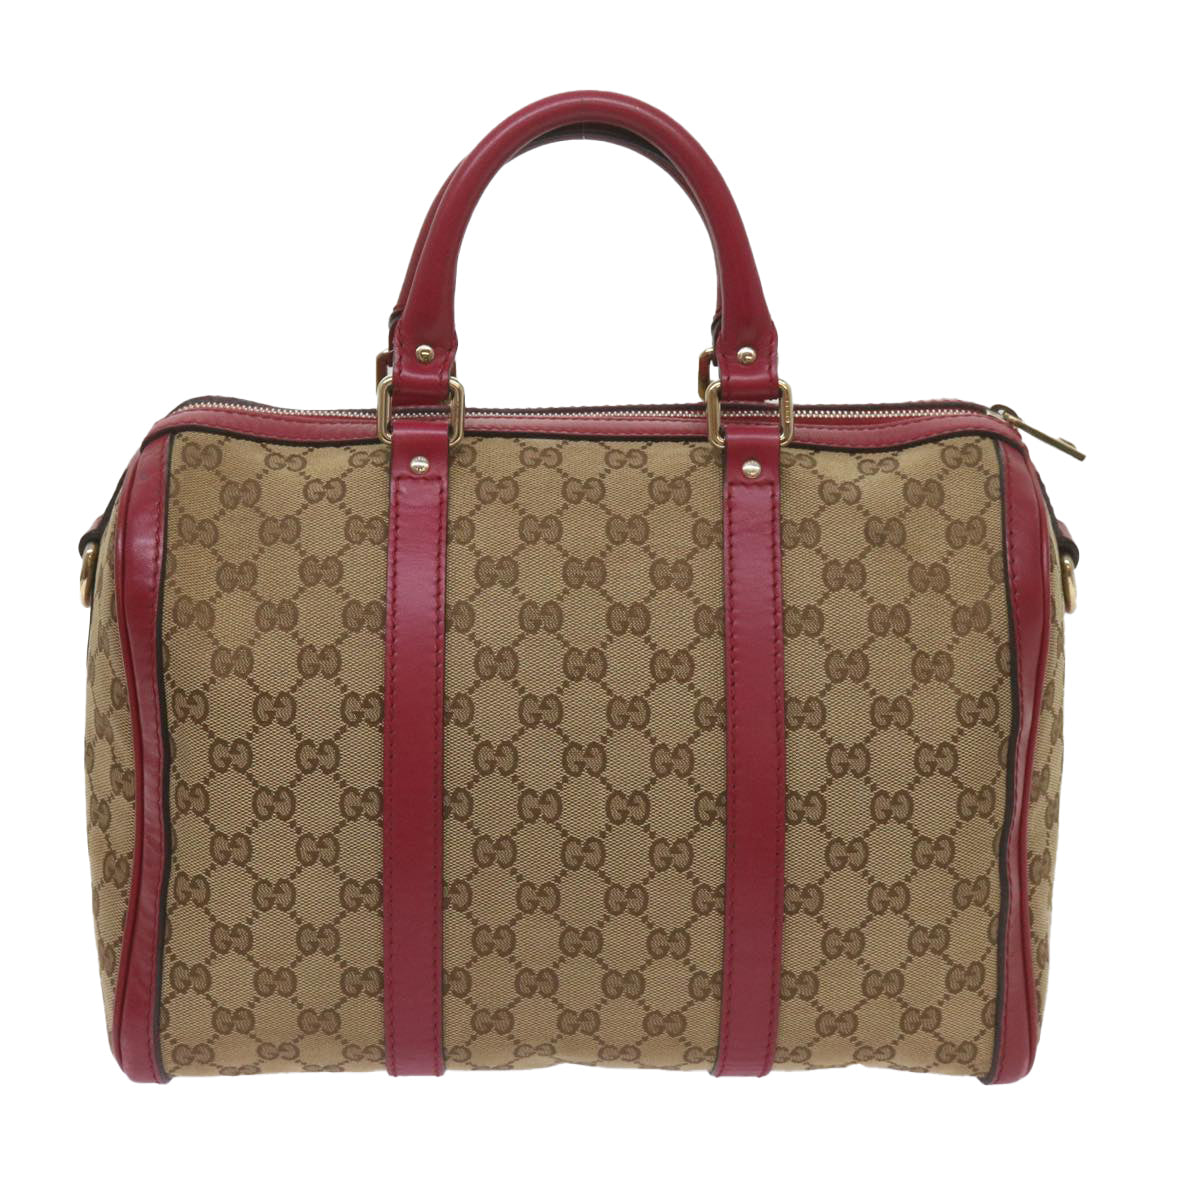 GUCCI GG Canvas Hand Bag 2way Beige Red 247205 Auth 68594 - 0